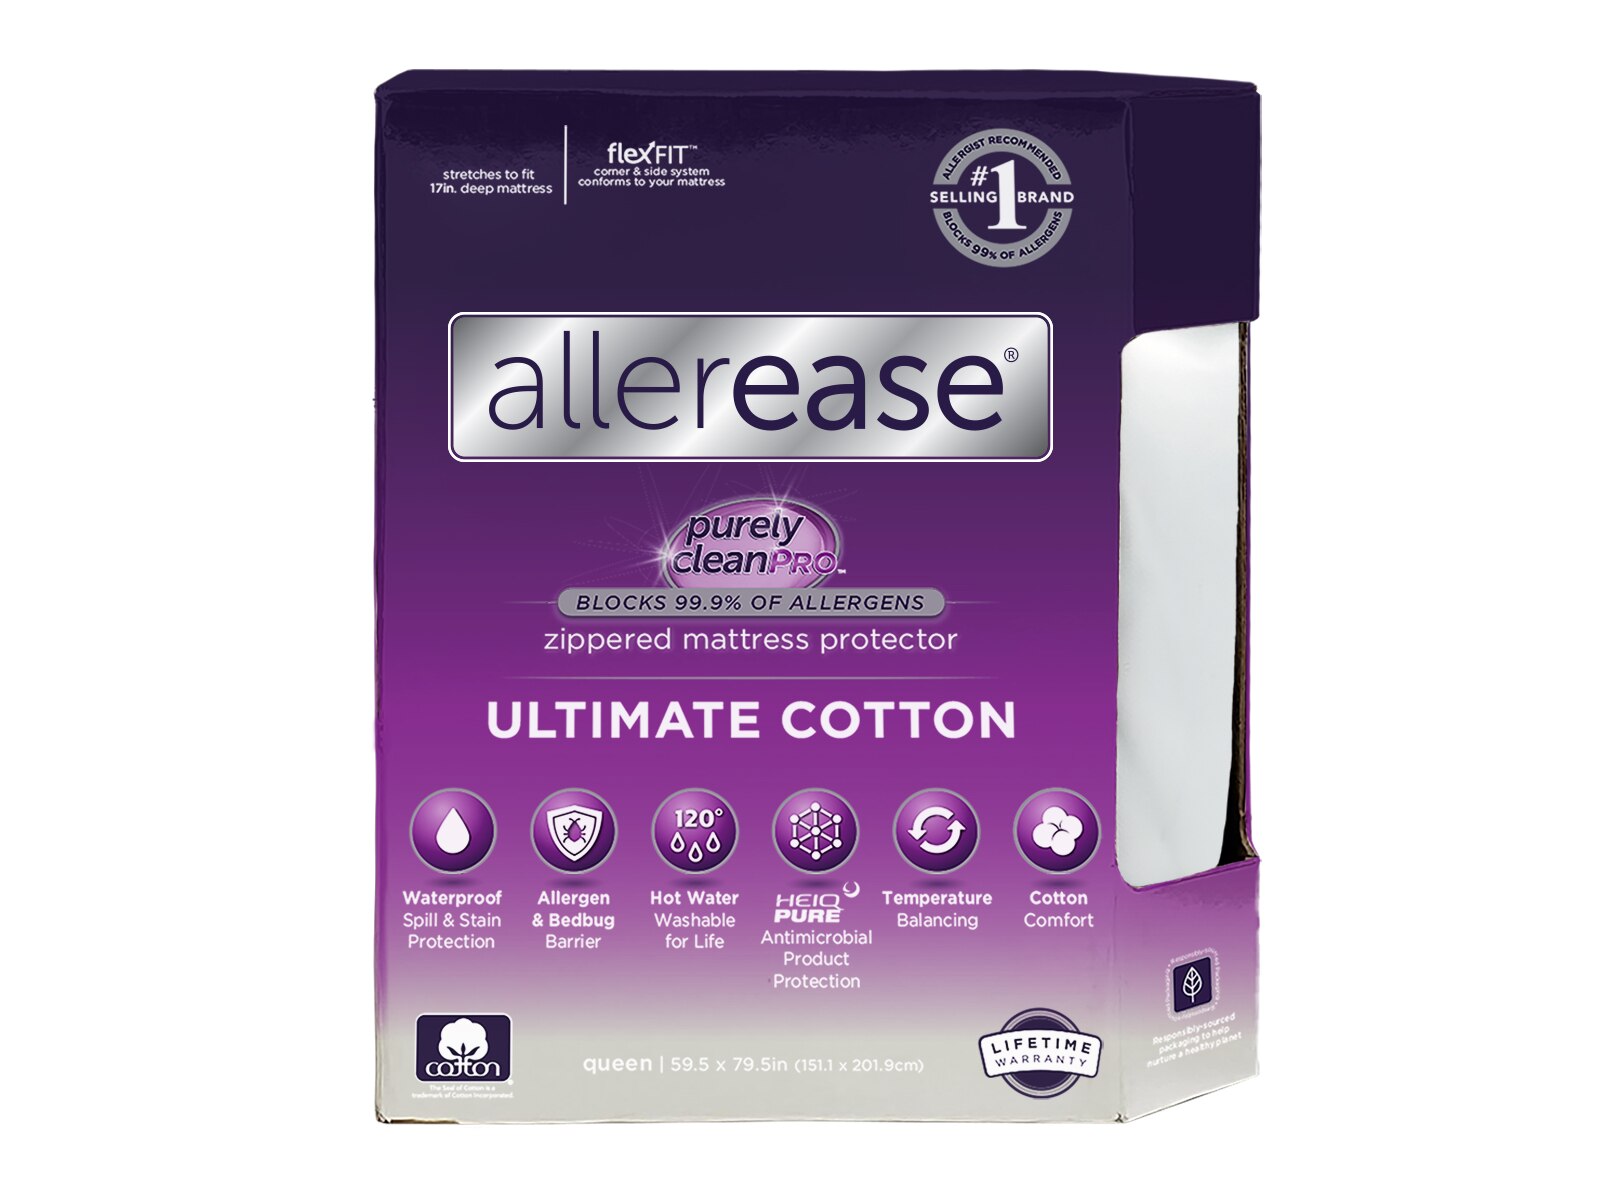 allerease ultimate mattress protector